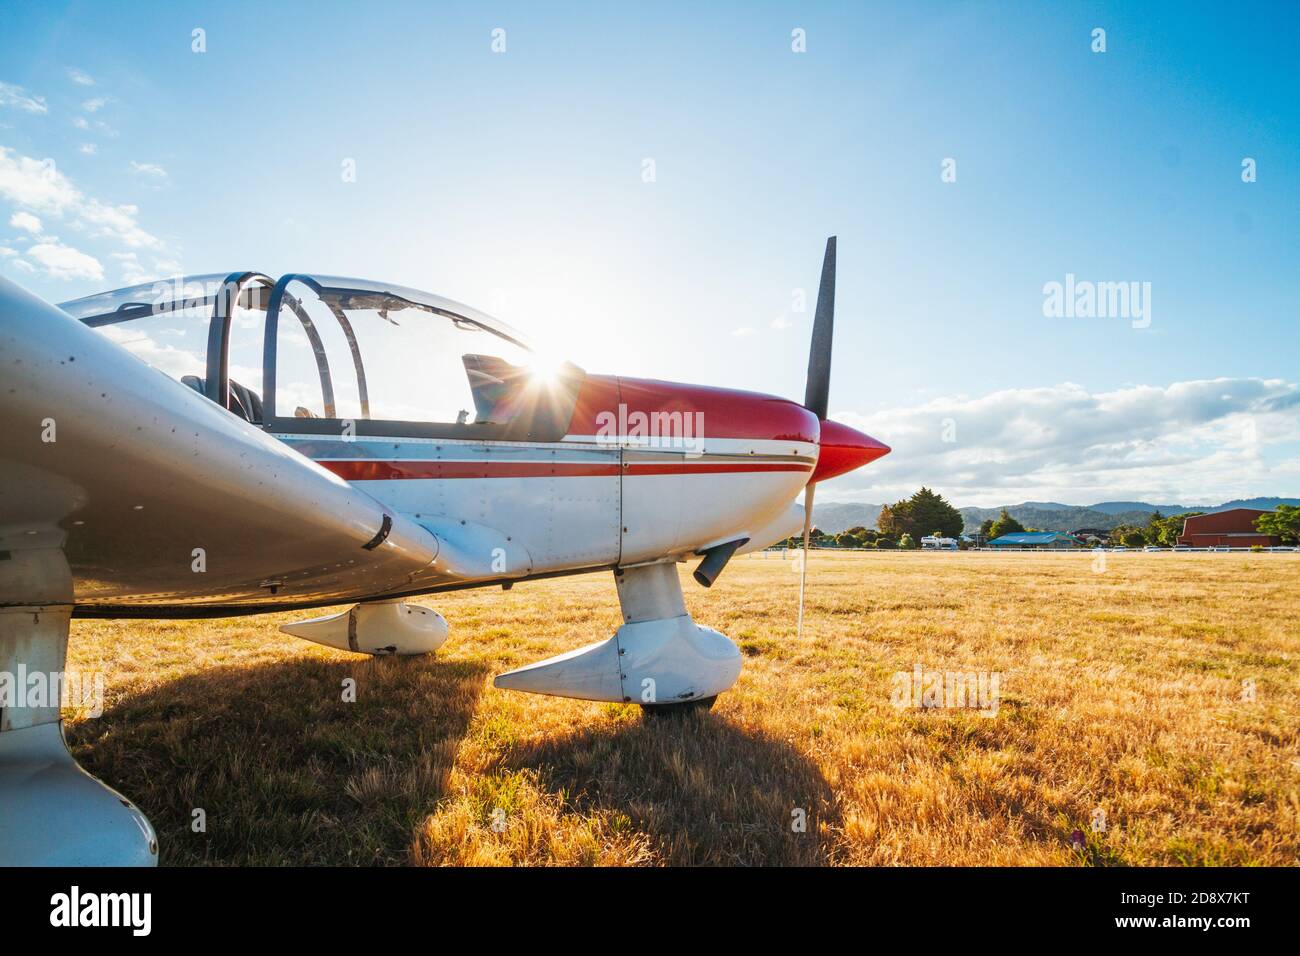 a Robin 2120 two-seater light aircraft sits parked on the grass at Pauanui Airfield, Coromandel, New Zealand as the summer sun sets Stock Photo